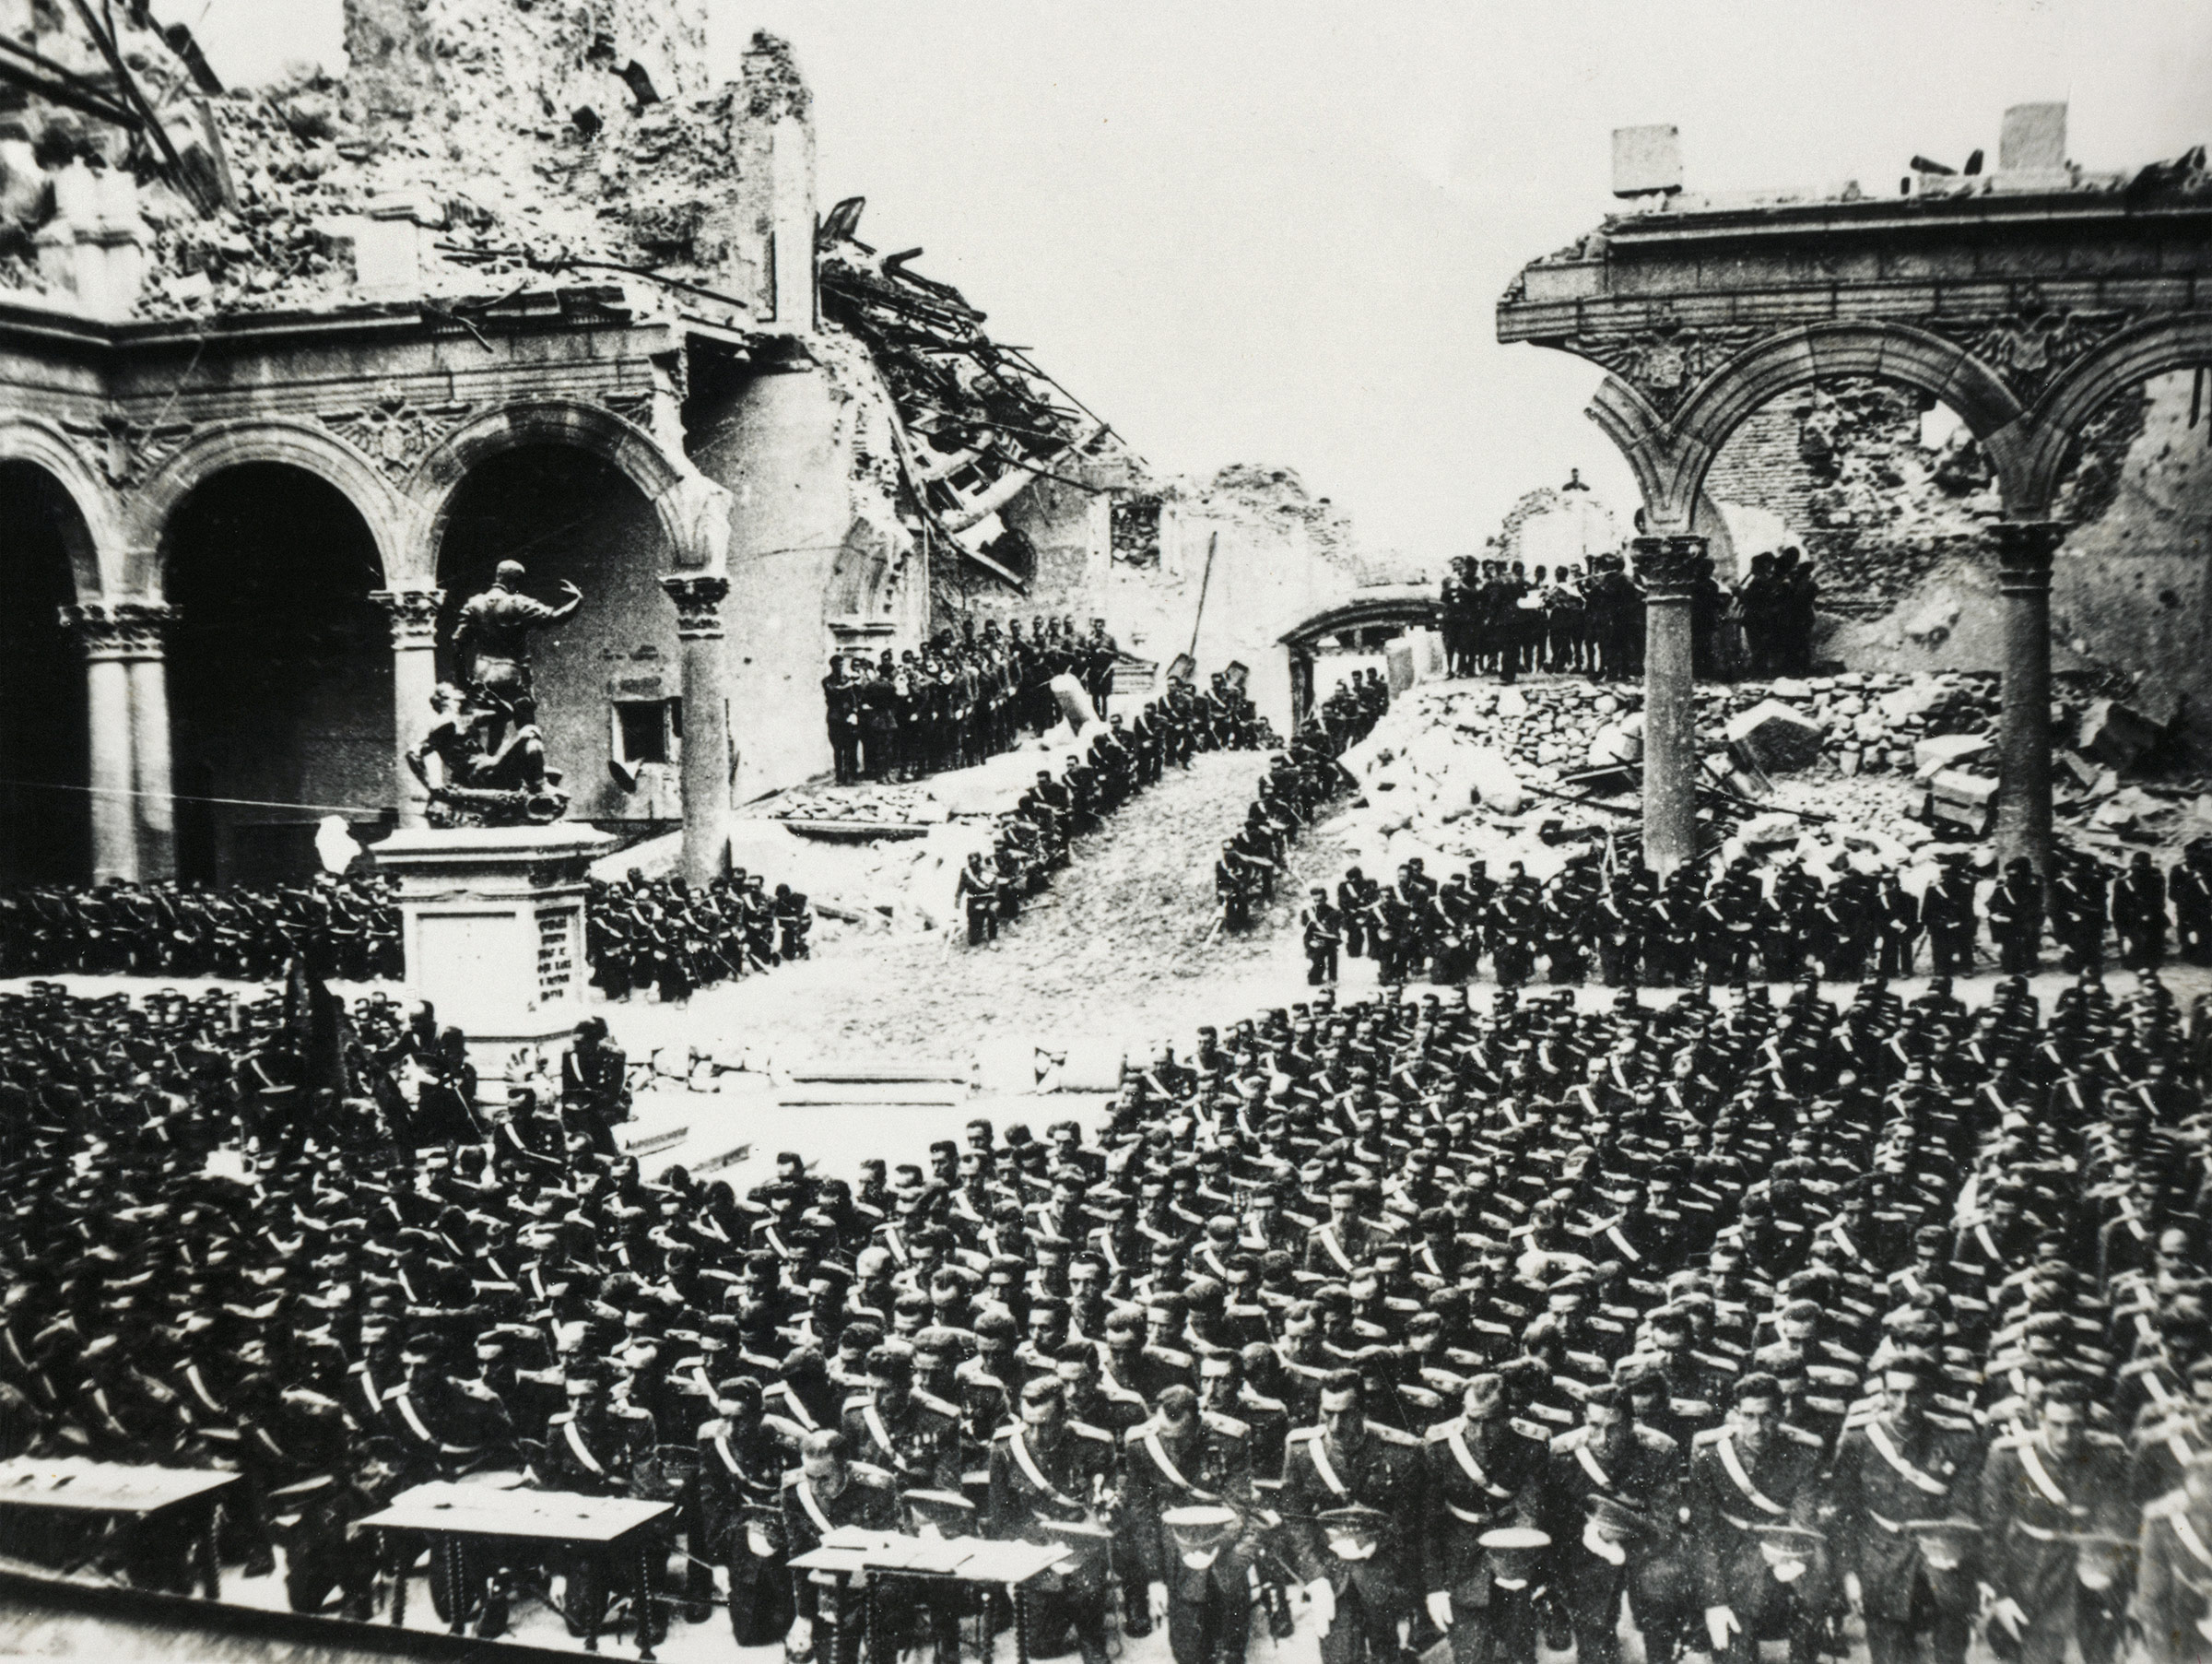 Cadets from the Francoist army swearing allegiance in the Alcazar in Toledo, Spain, after it was destroyed by bombing, in 1937. (De Agostini/Getty Images)